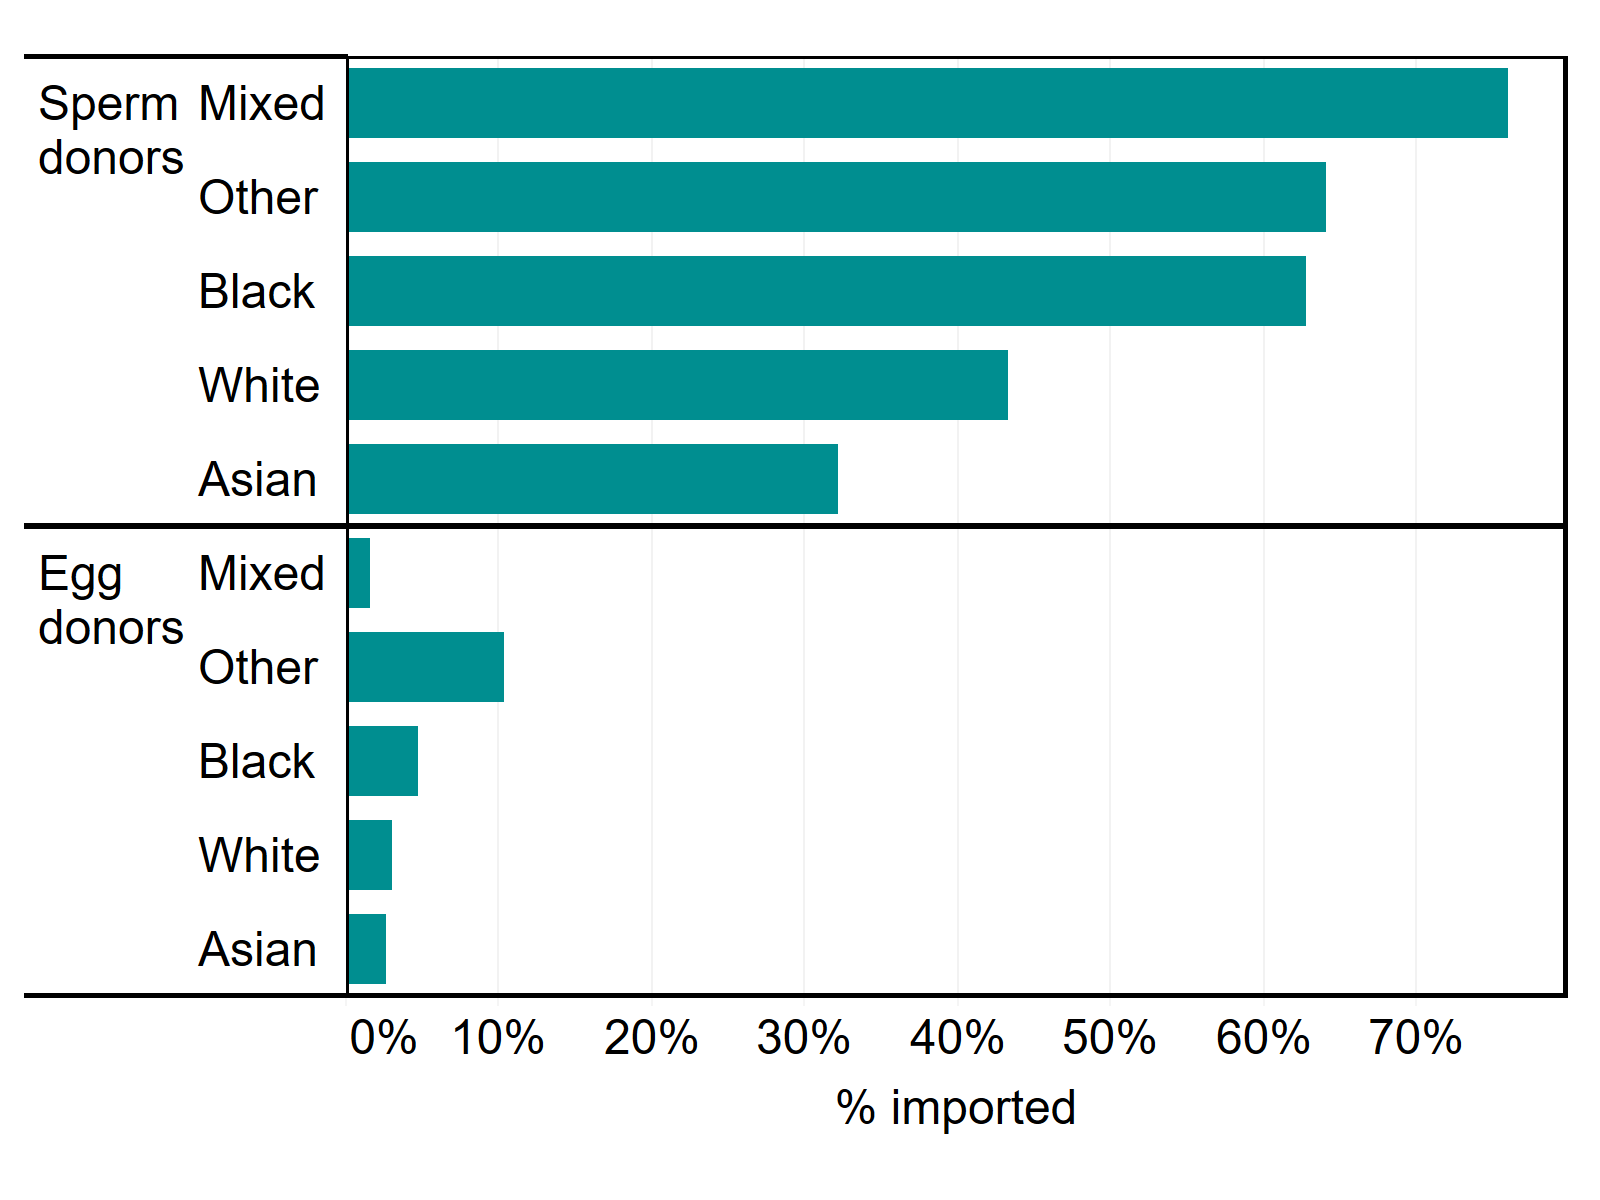 Proportion of sperm and egg donors imported to the UK by ethnicity, 2014-2018. The horizontal bar graph shows the proportion of imported donor egg and sperm by donor ethnicity. Mixed, Other and Black sperm donors were most commonly imported, accounting for 76% of all Mixed, 64% of all Other and 63% of all Black sperm donations. White sperm donations were imported in 43% of all sperm donations and the least common ethnic group for imported sperm was Asian with 32% of Asian sperm donations imported. For egg donation, Other had the highest proportion of imported eggs (10%) followed by Black (5%), White (3%), Asian (3%) and Mixed (2%).